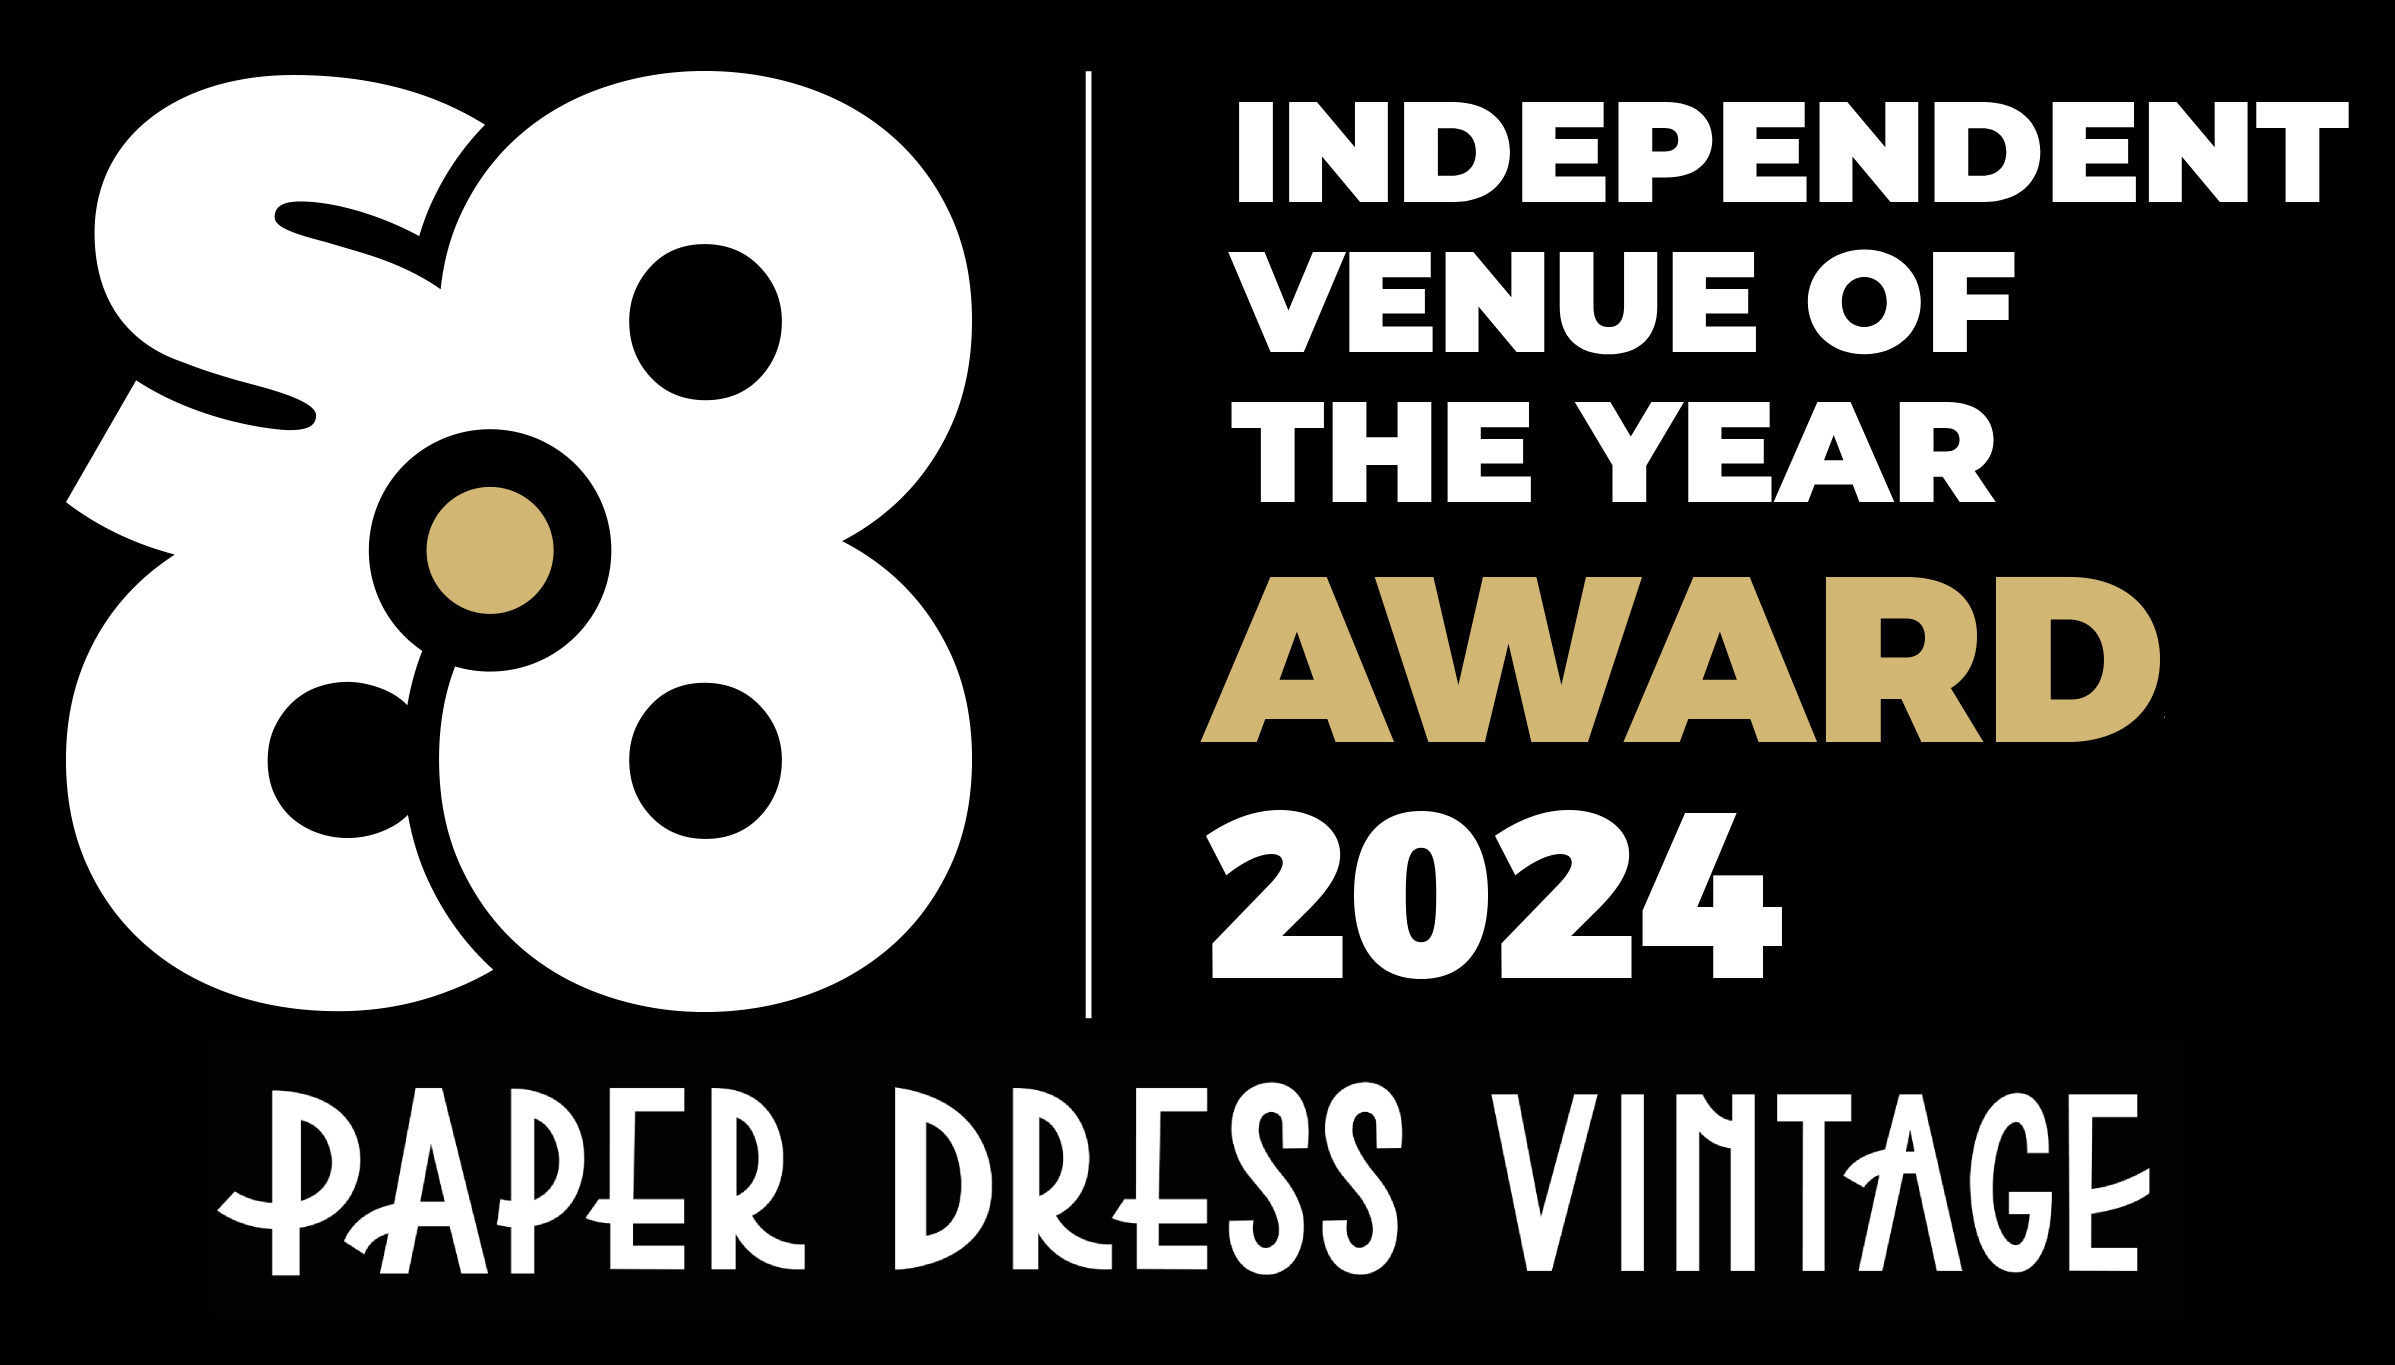 Independent Venue of the Year 2024 award